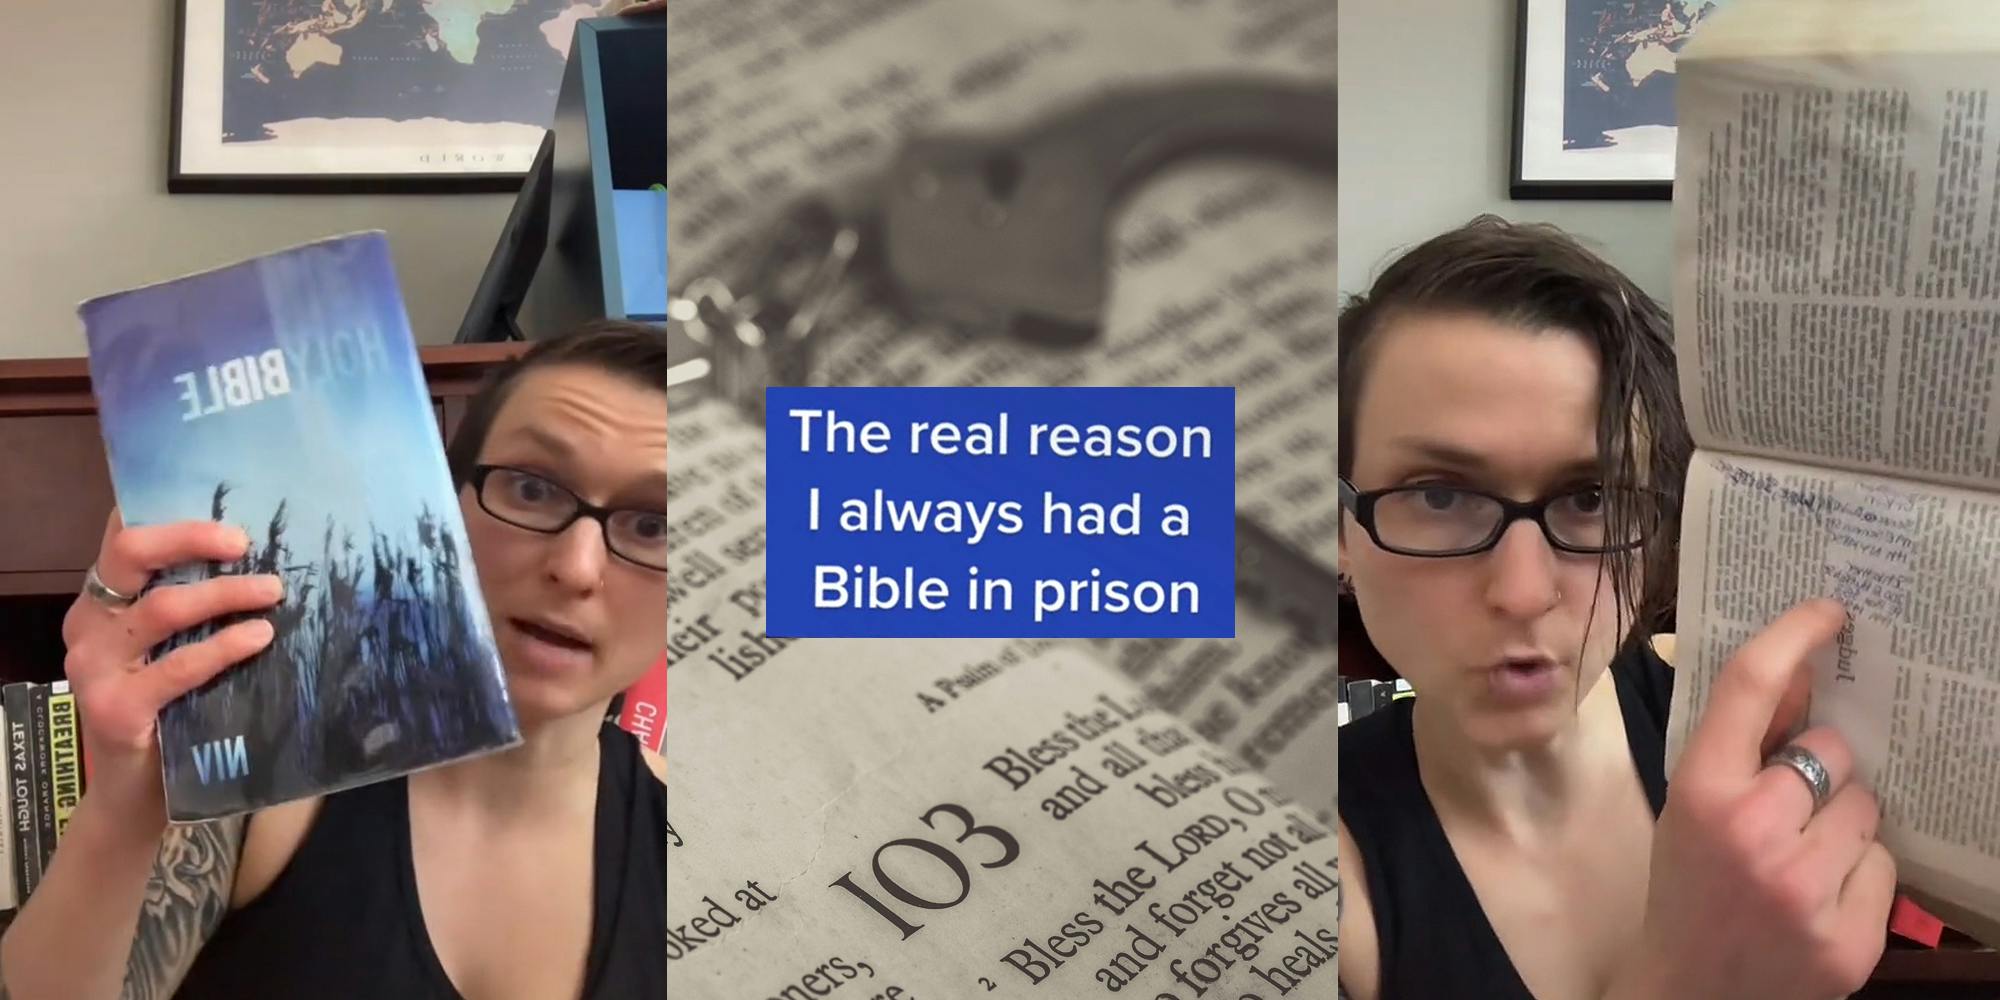 ‘That is such a bizarre & twisted rule’: TikToker shares why she brought a Bible to prison, even though she’s an atheist